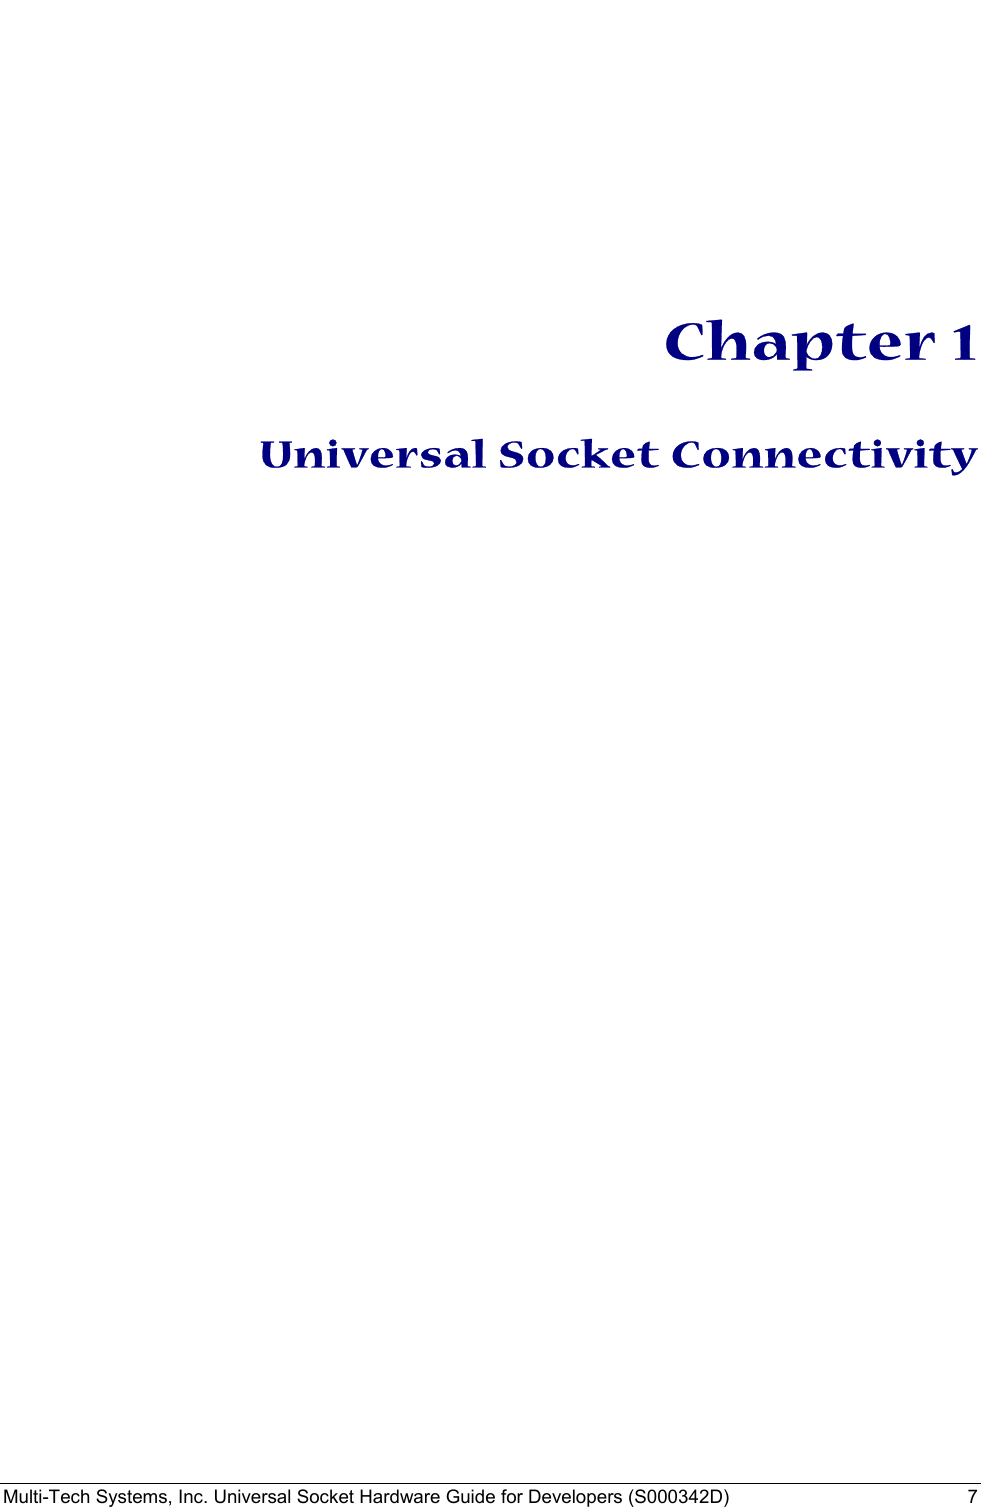  Multi-Tech Systems, Inc. Universal Socket Hardware Guide for Developers (S000342D)  7               Chapter 1  Universal Socket Connectivity  